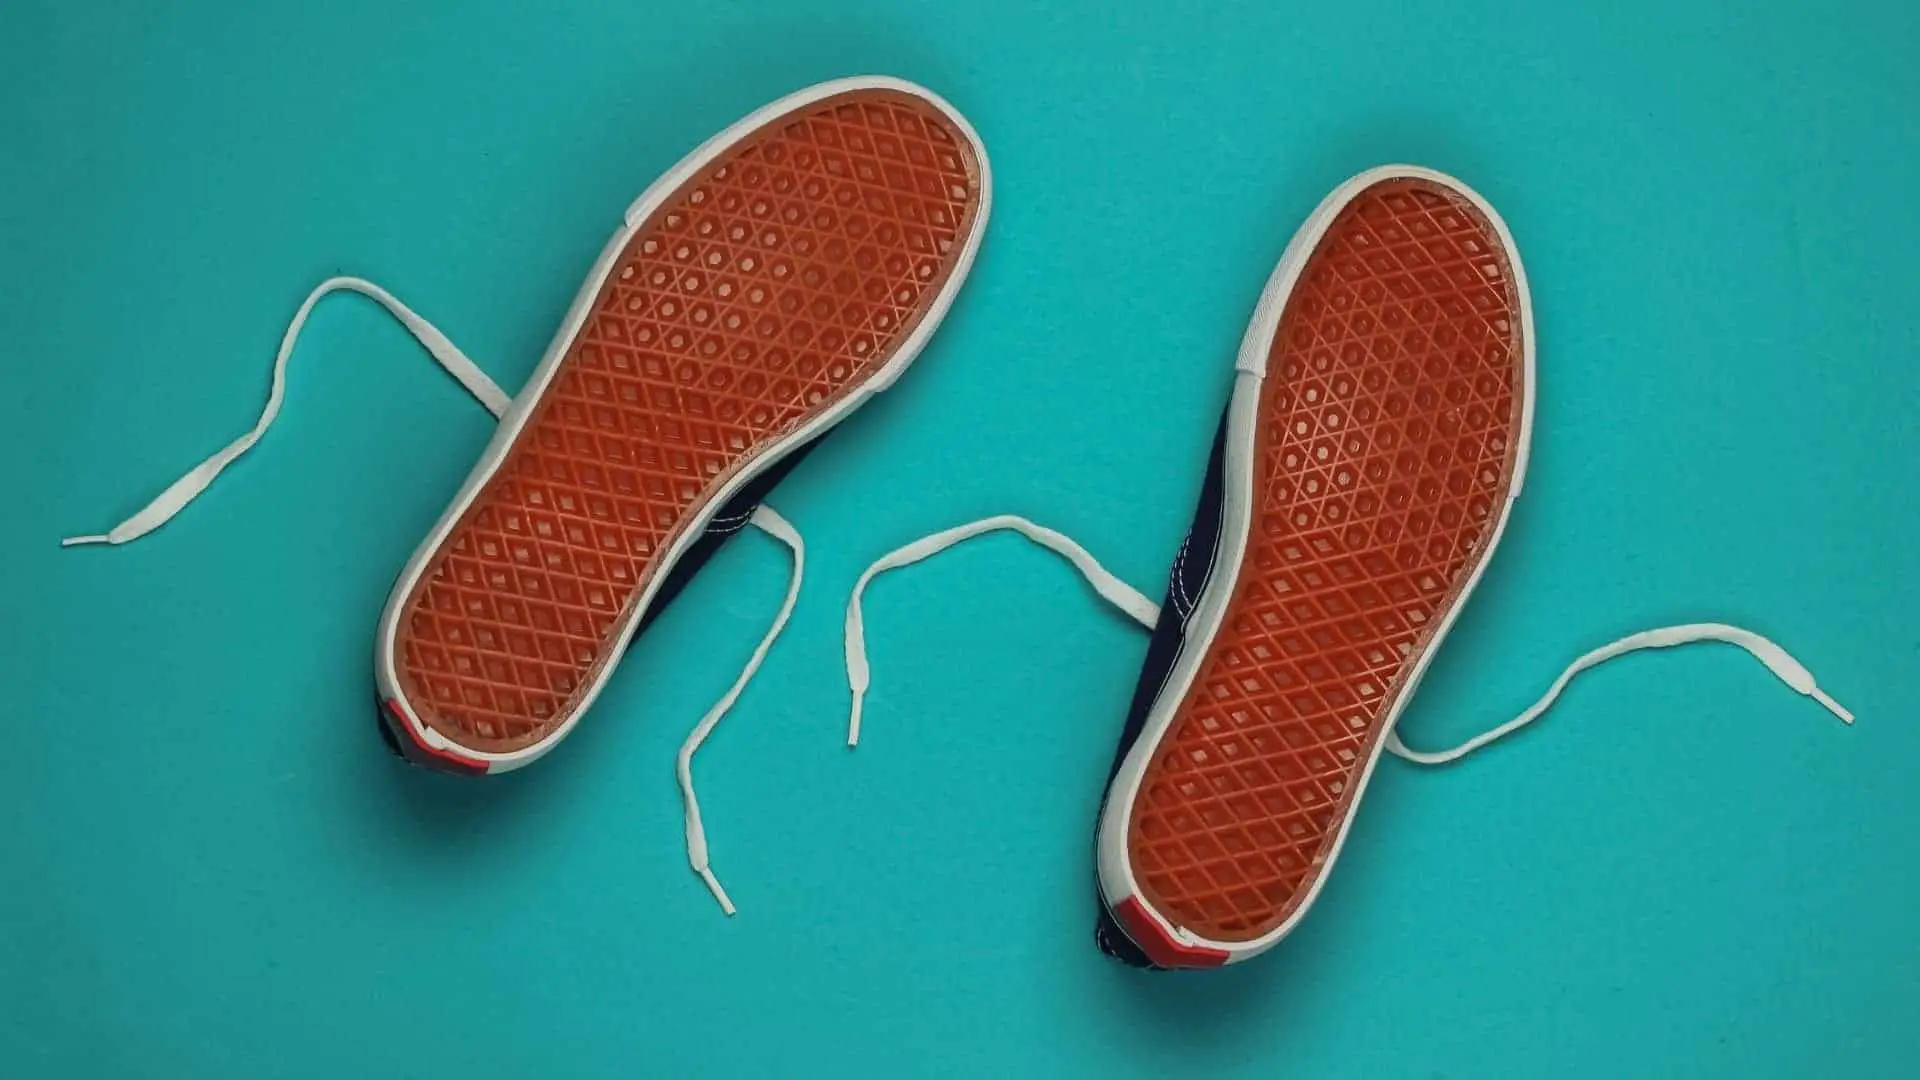 How To Paint Rubber Soles On Sneakers